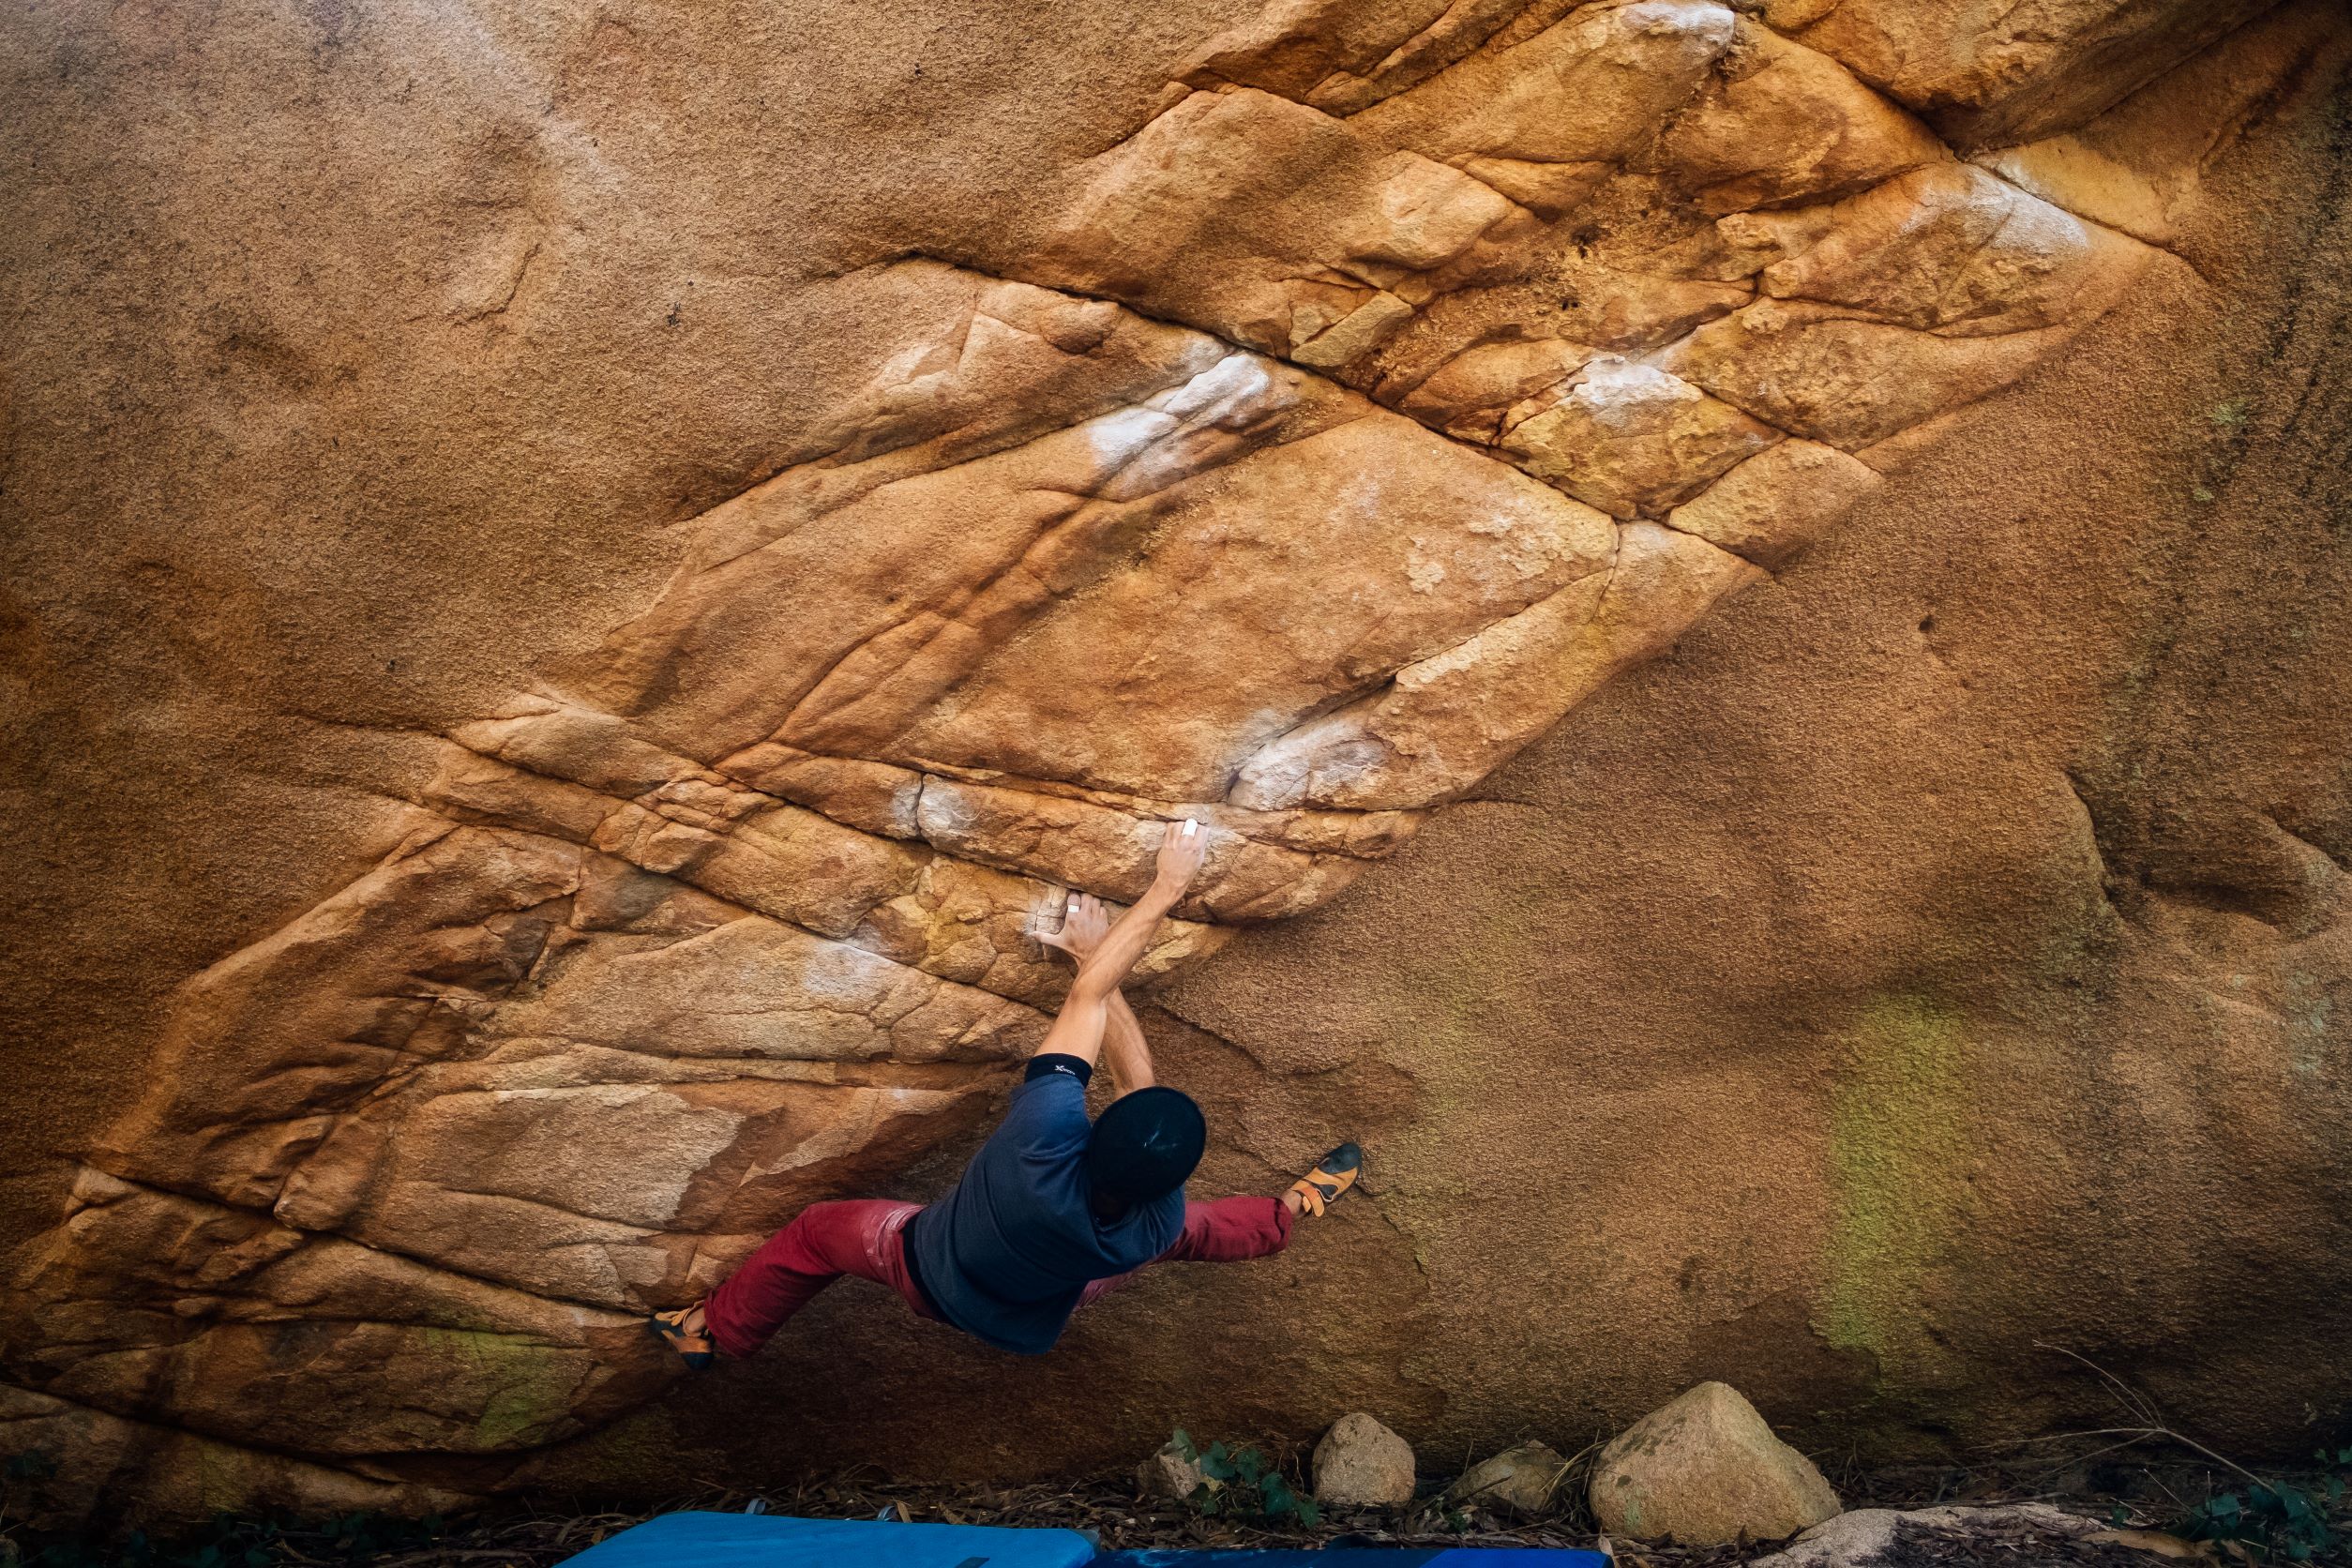 A climber on a boulder problem in the Albarrasintra sector of Sintra